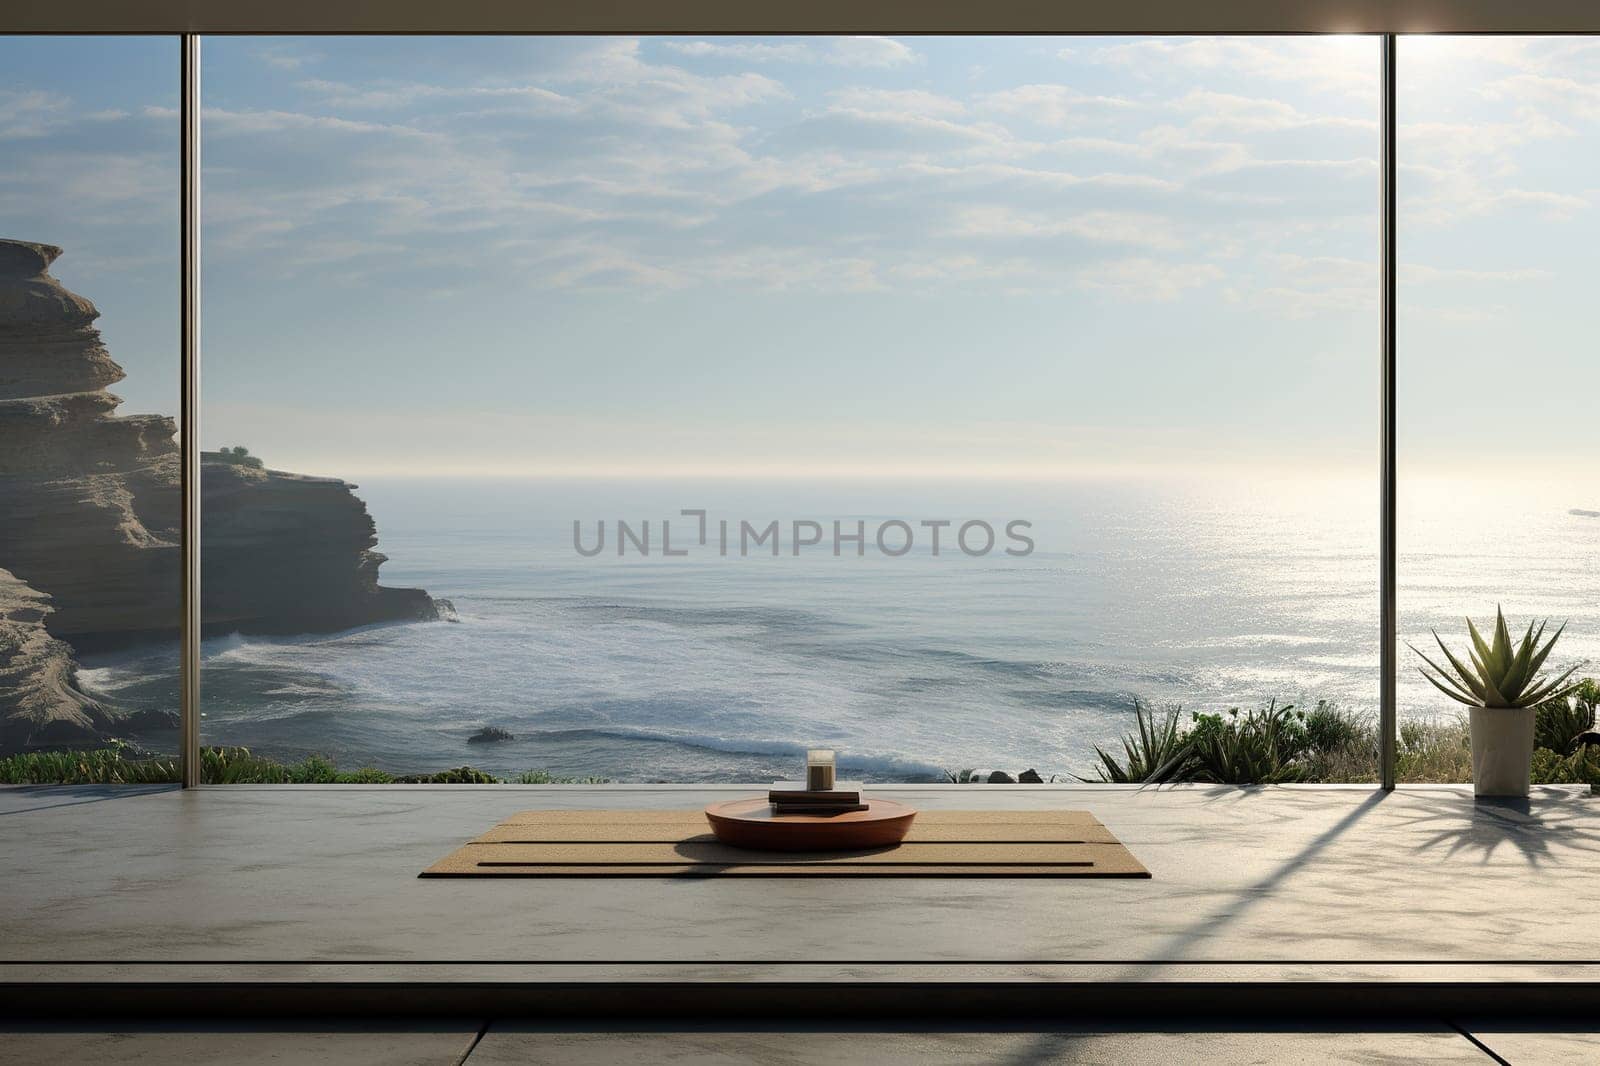 Space for meditation and yoga overlooking the ocean. Generated by artificial intelligence by Vovmar